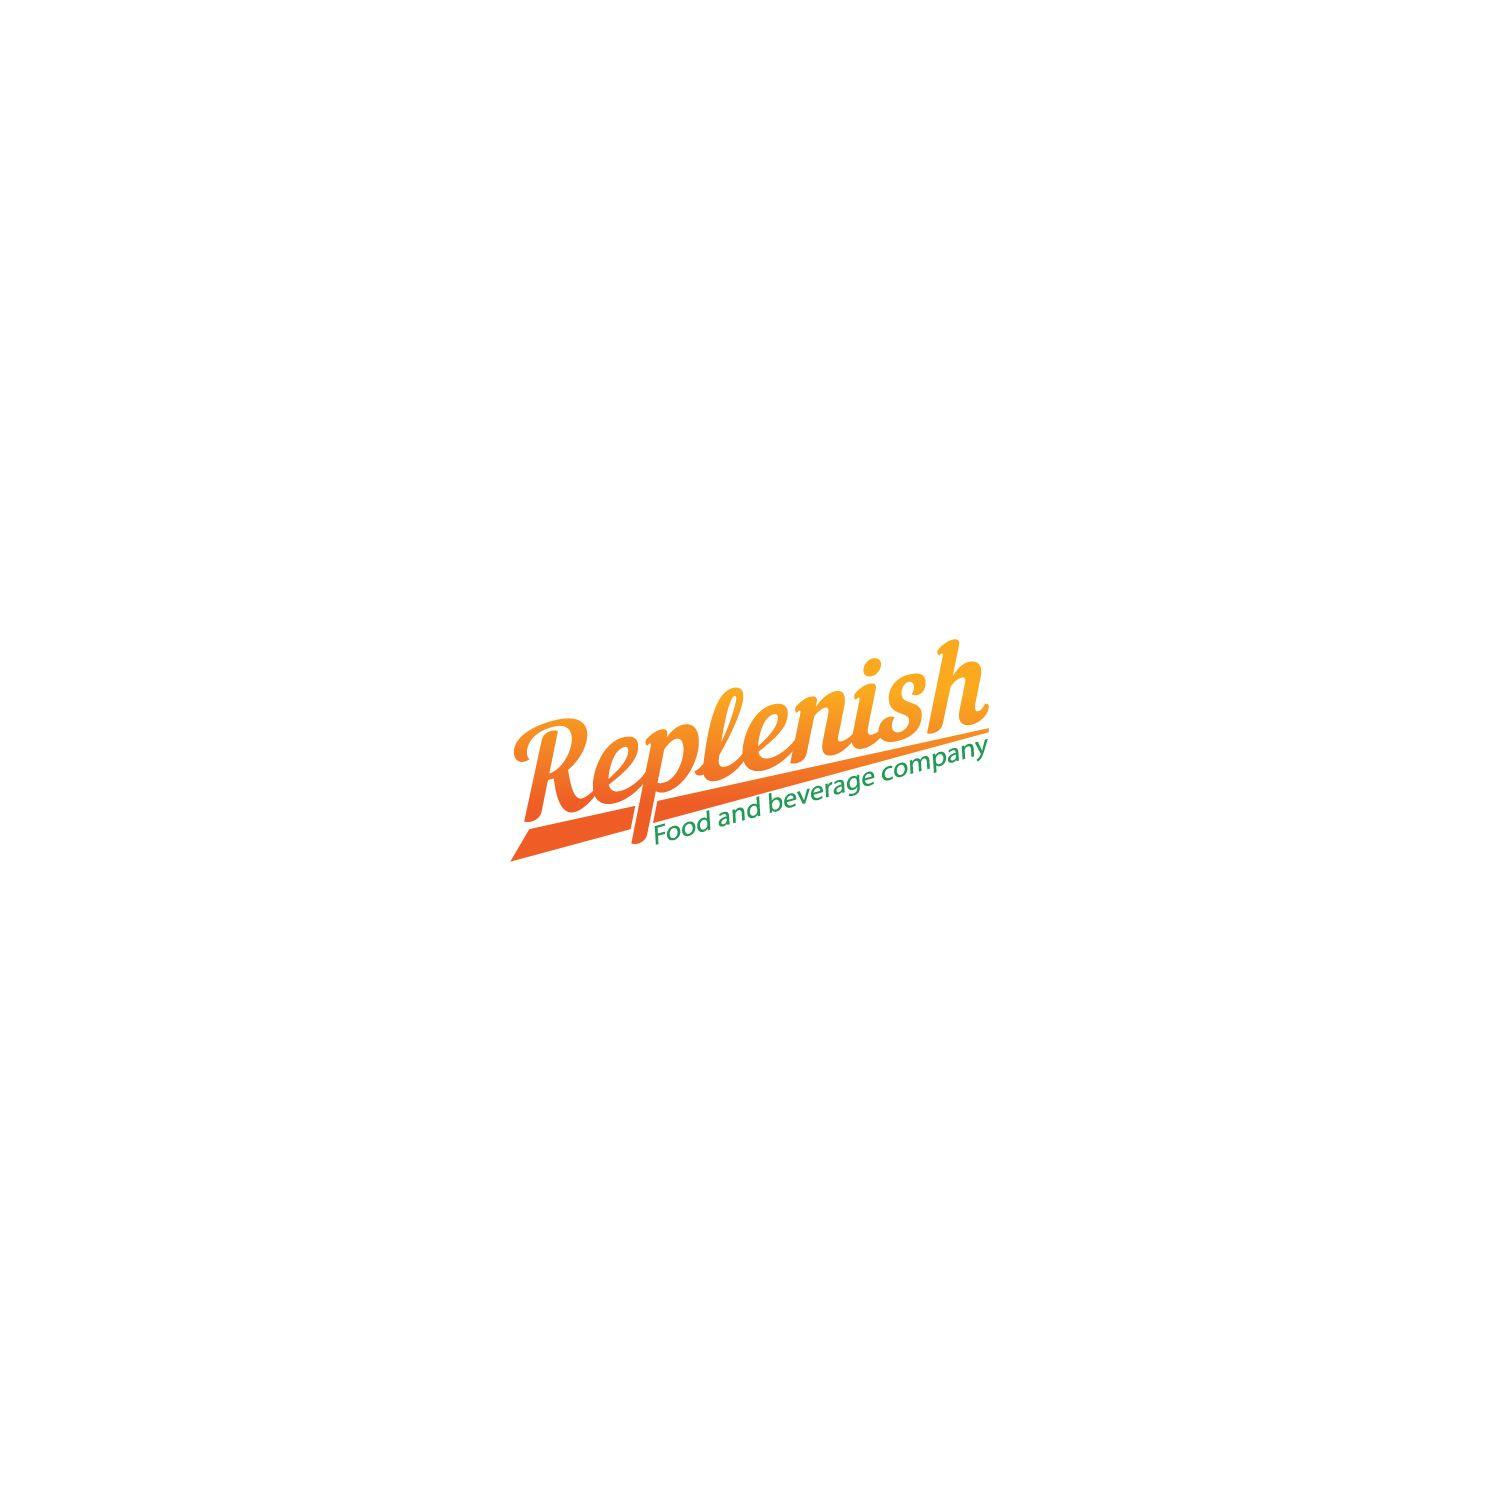 Food and Beverage Company Logo - Modern, Professional, It Company Logo Design for Replenish (by line ...